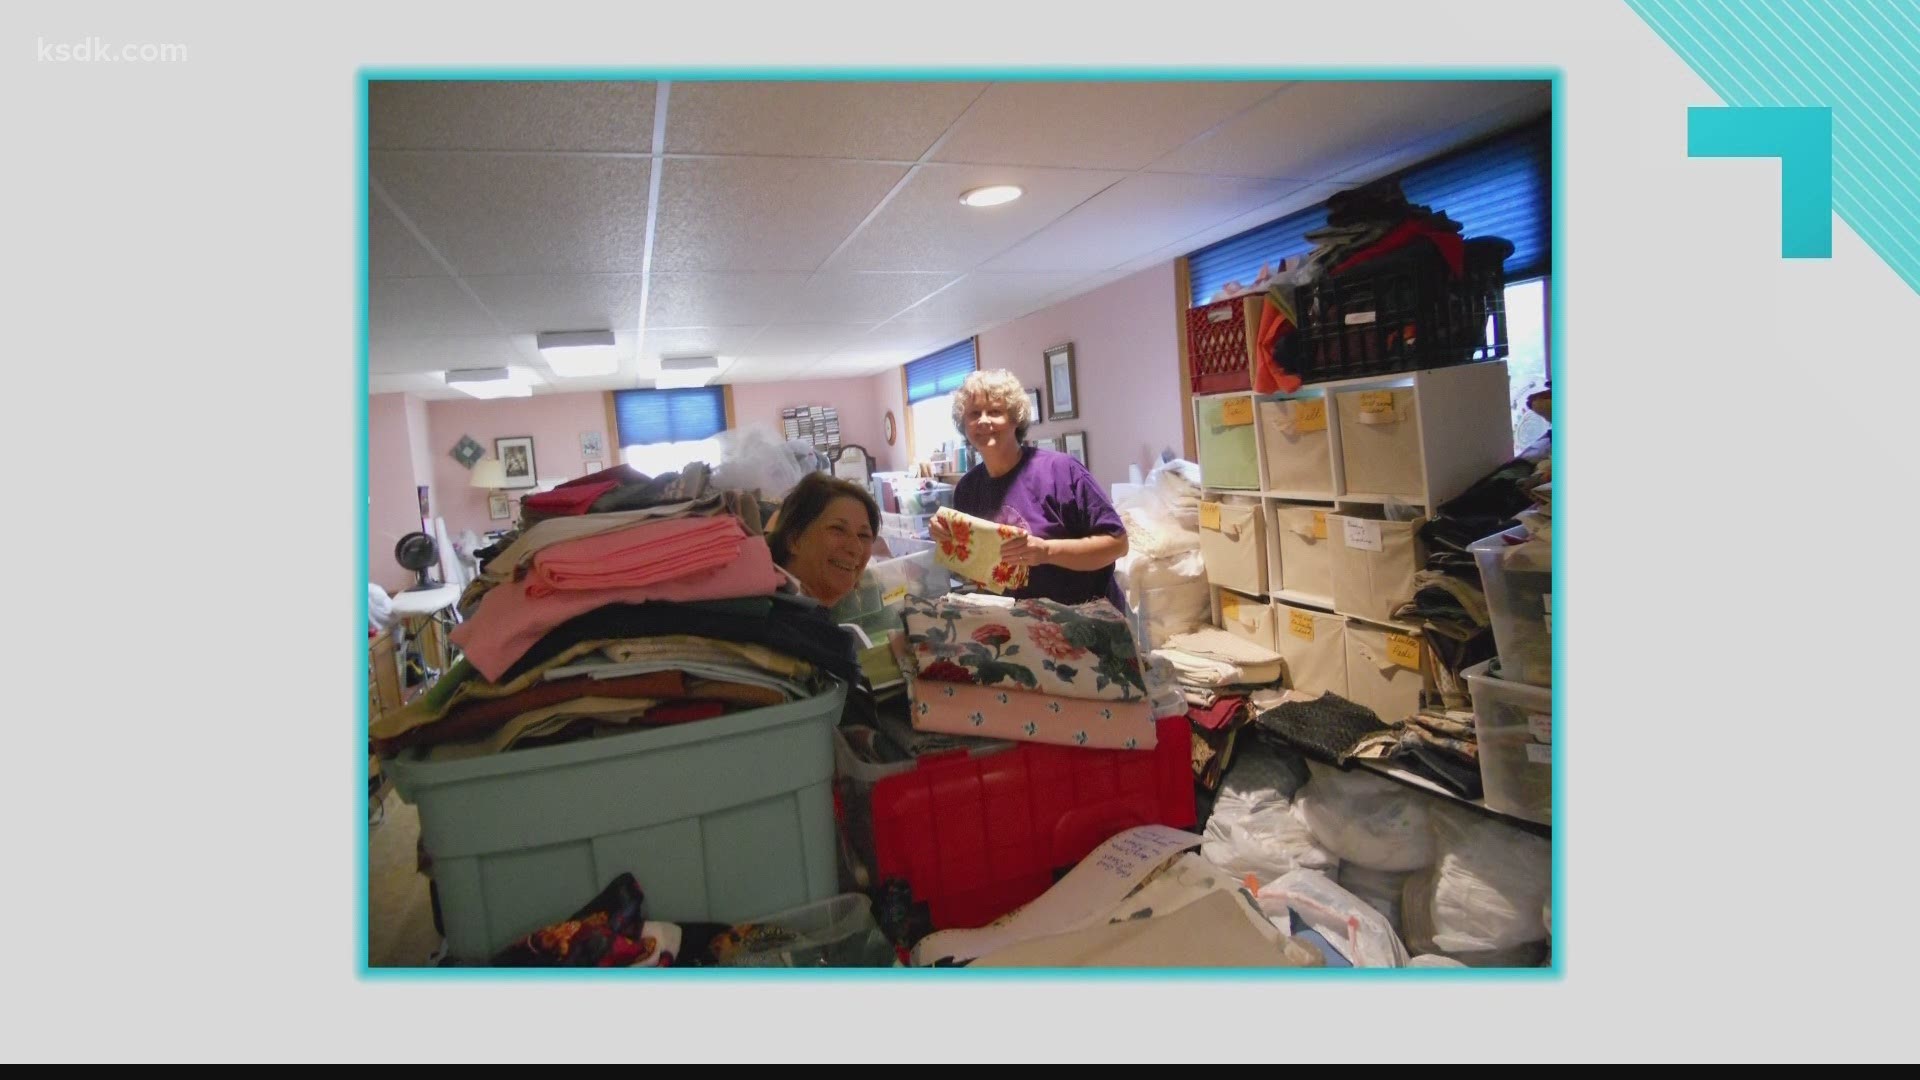 Charity Sharity has been such a success that fabric is taking over founder Carole Splater’s basement.